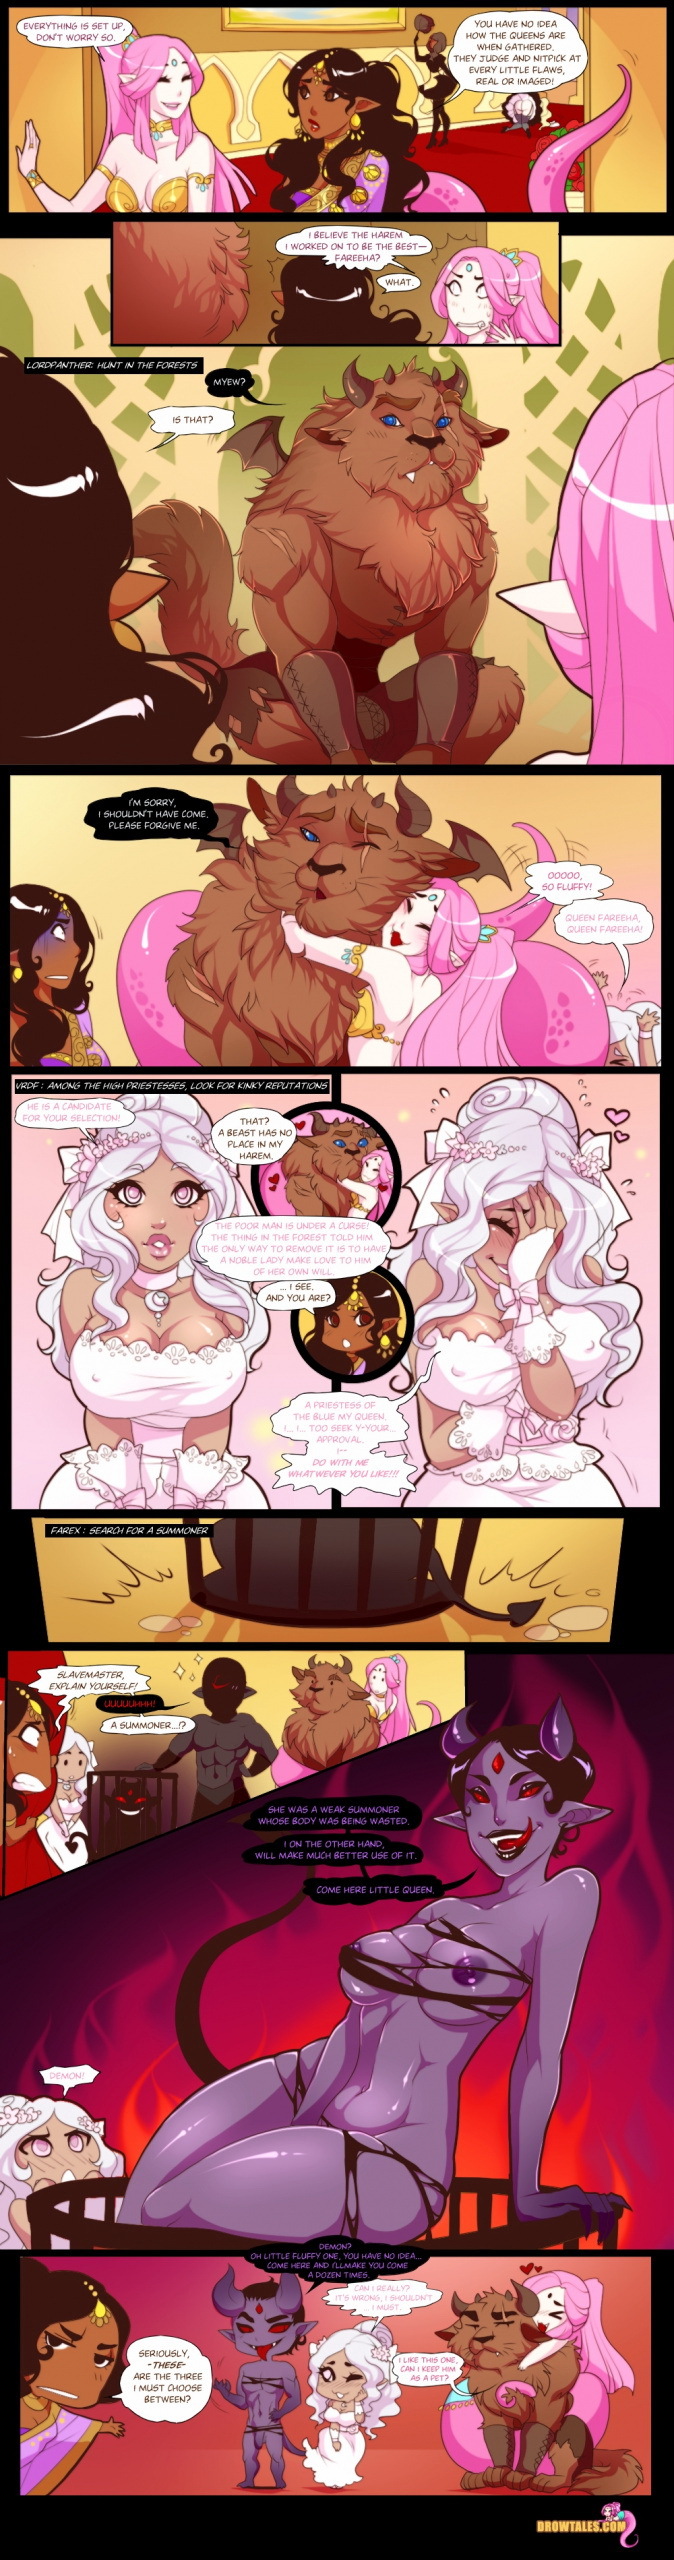 Queen of Butts - Page 48